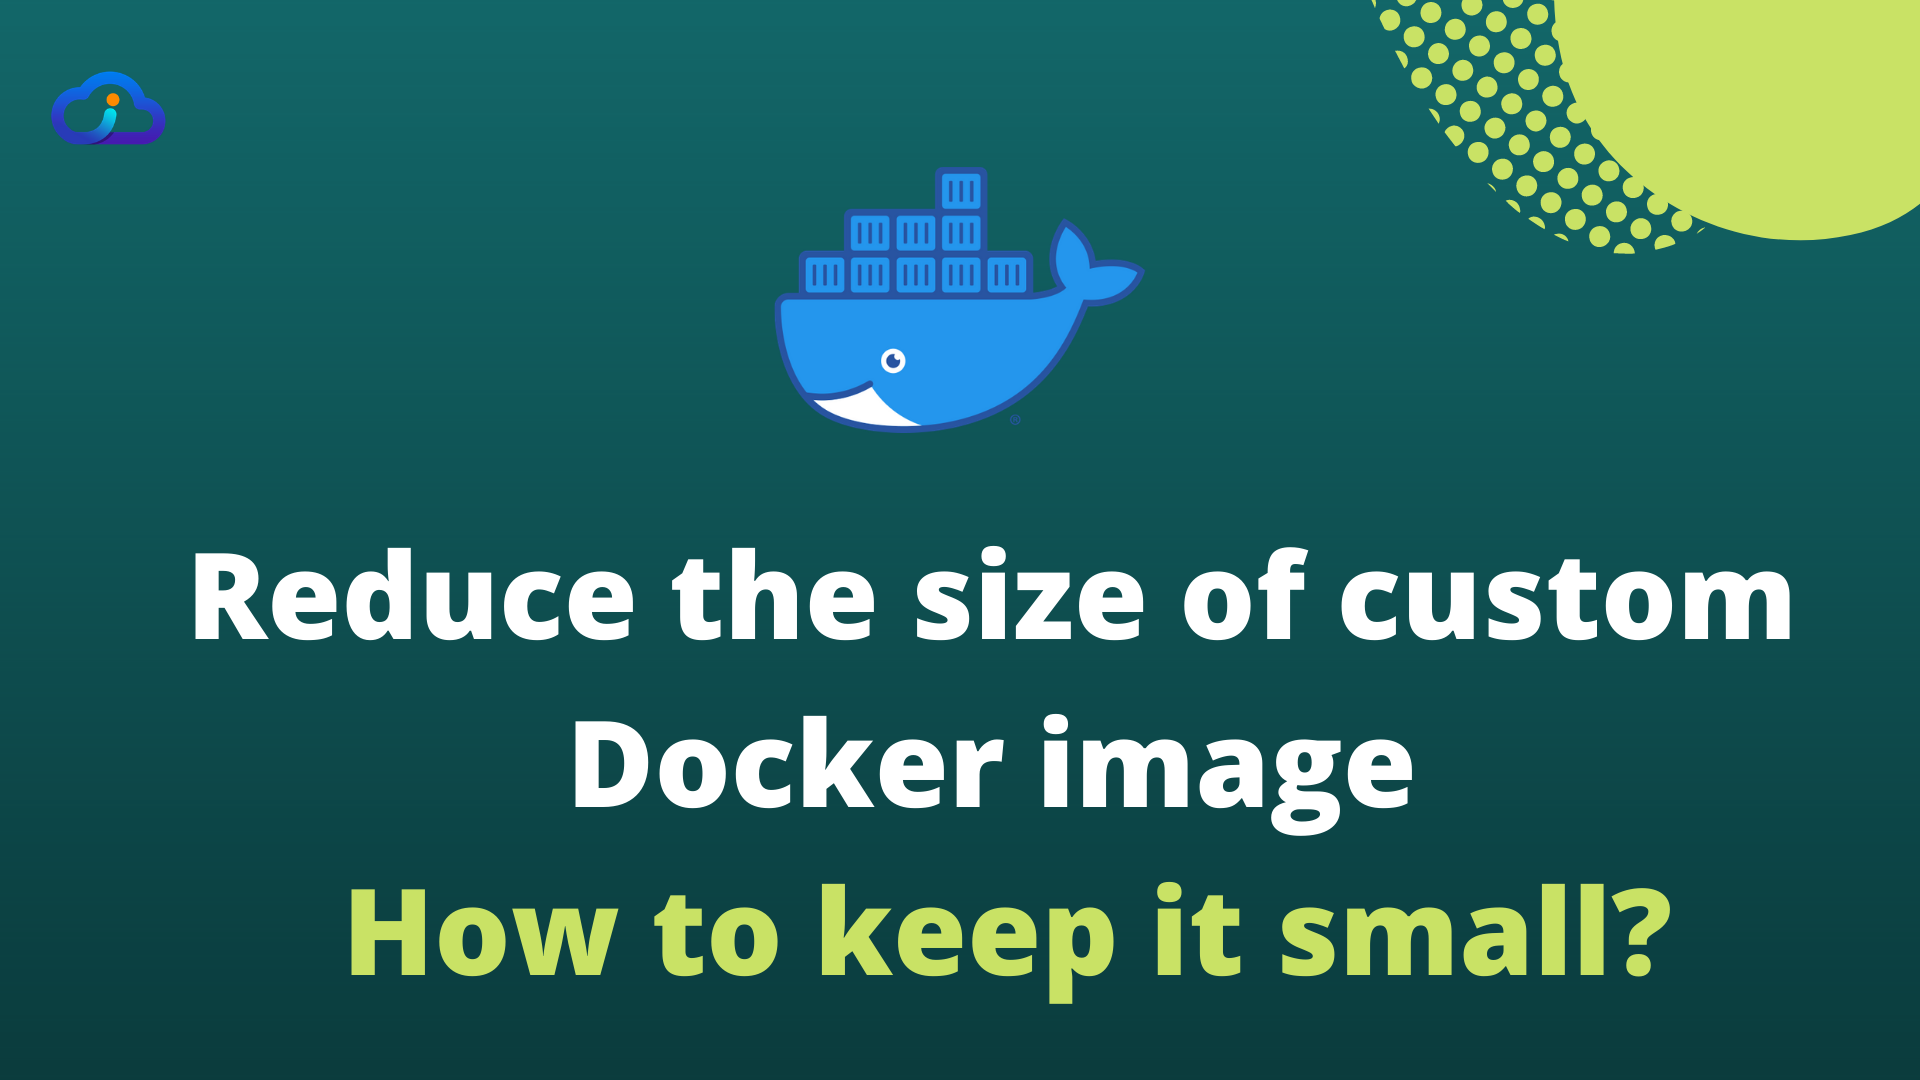 Reduce the size of custom Docker image - How to keep it small?